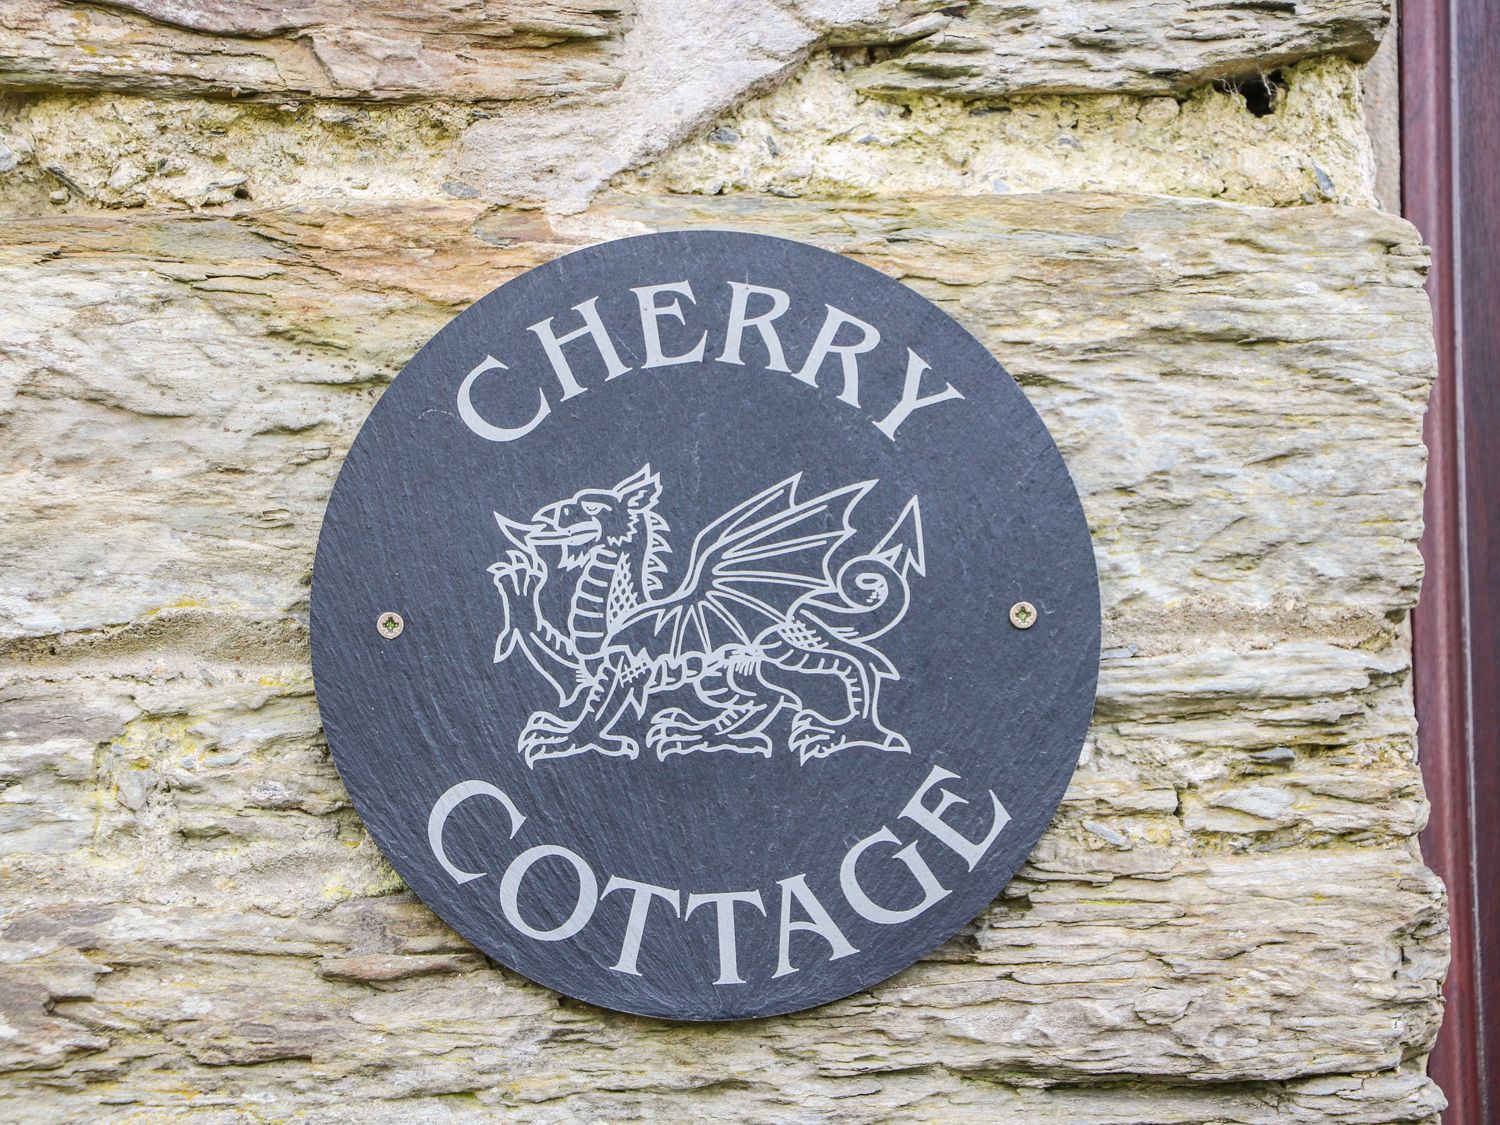 Cherry Cottage, Wales